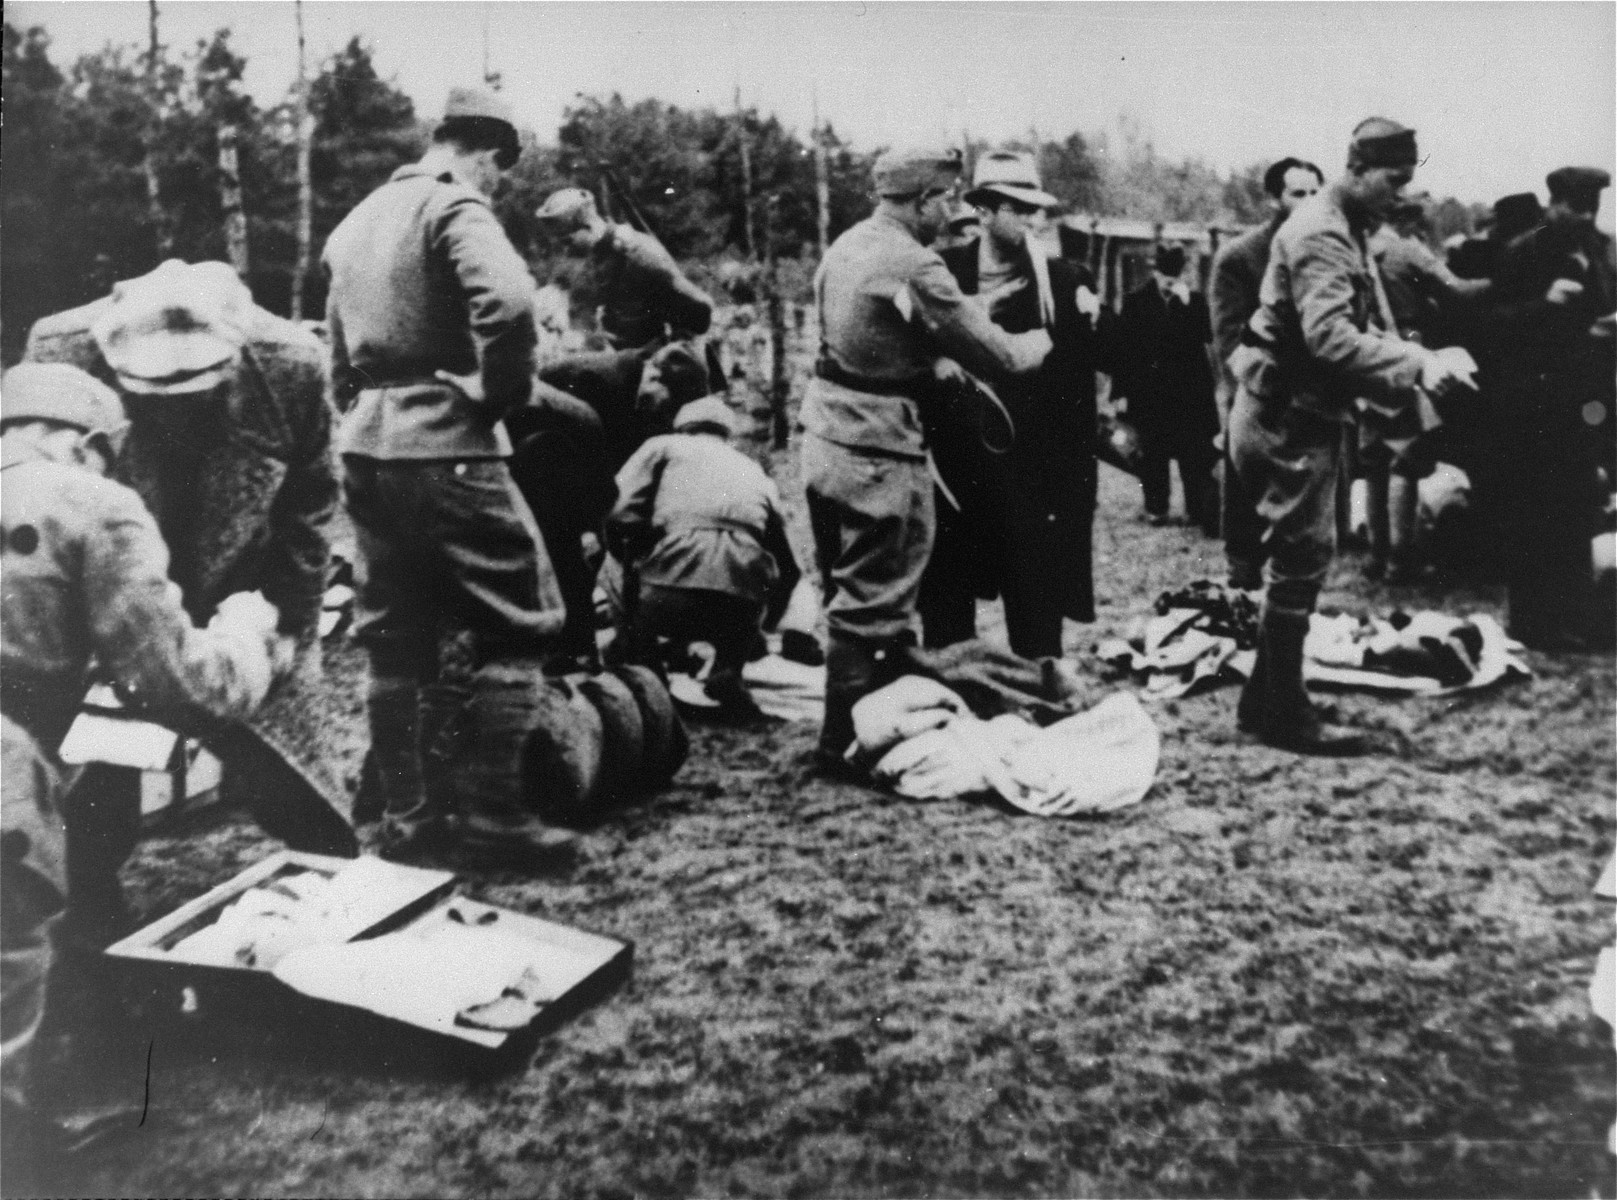 Ustasa guards confiscate the possessions of newly arrived prisoners in the Jasenovac concentration camp.

Andor Willer is pictured being frisked in the lcenter oreground in the light colored hat and dark overcoat with a document in his mouth.